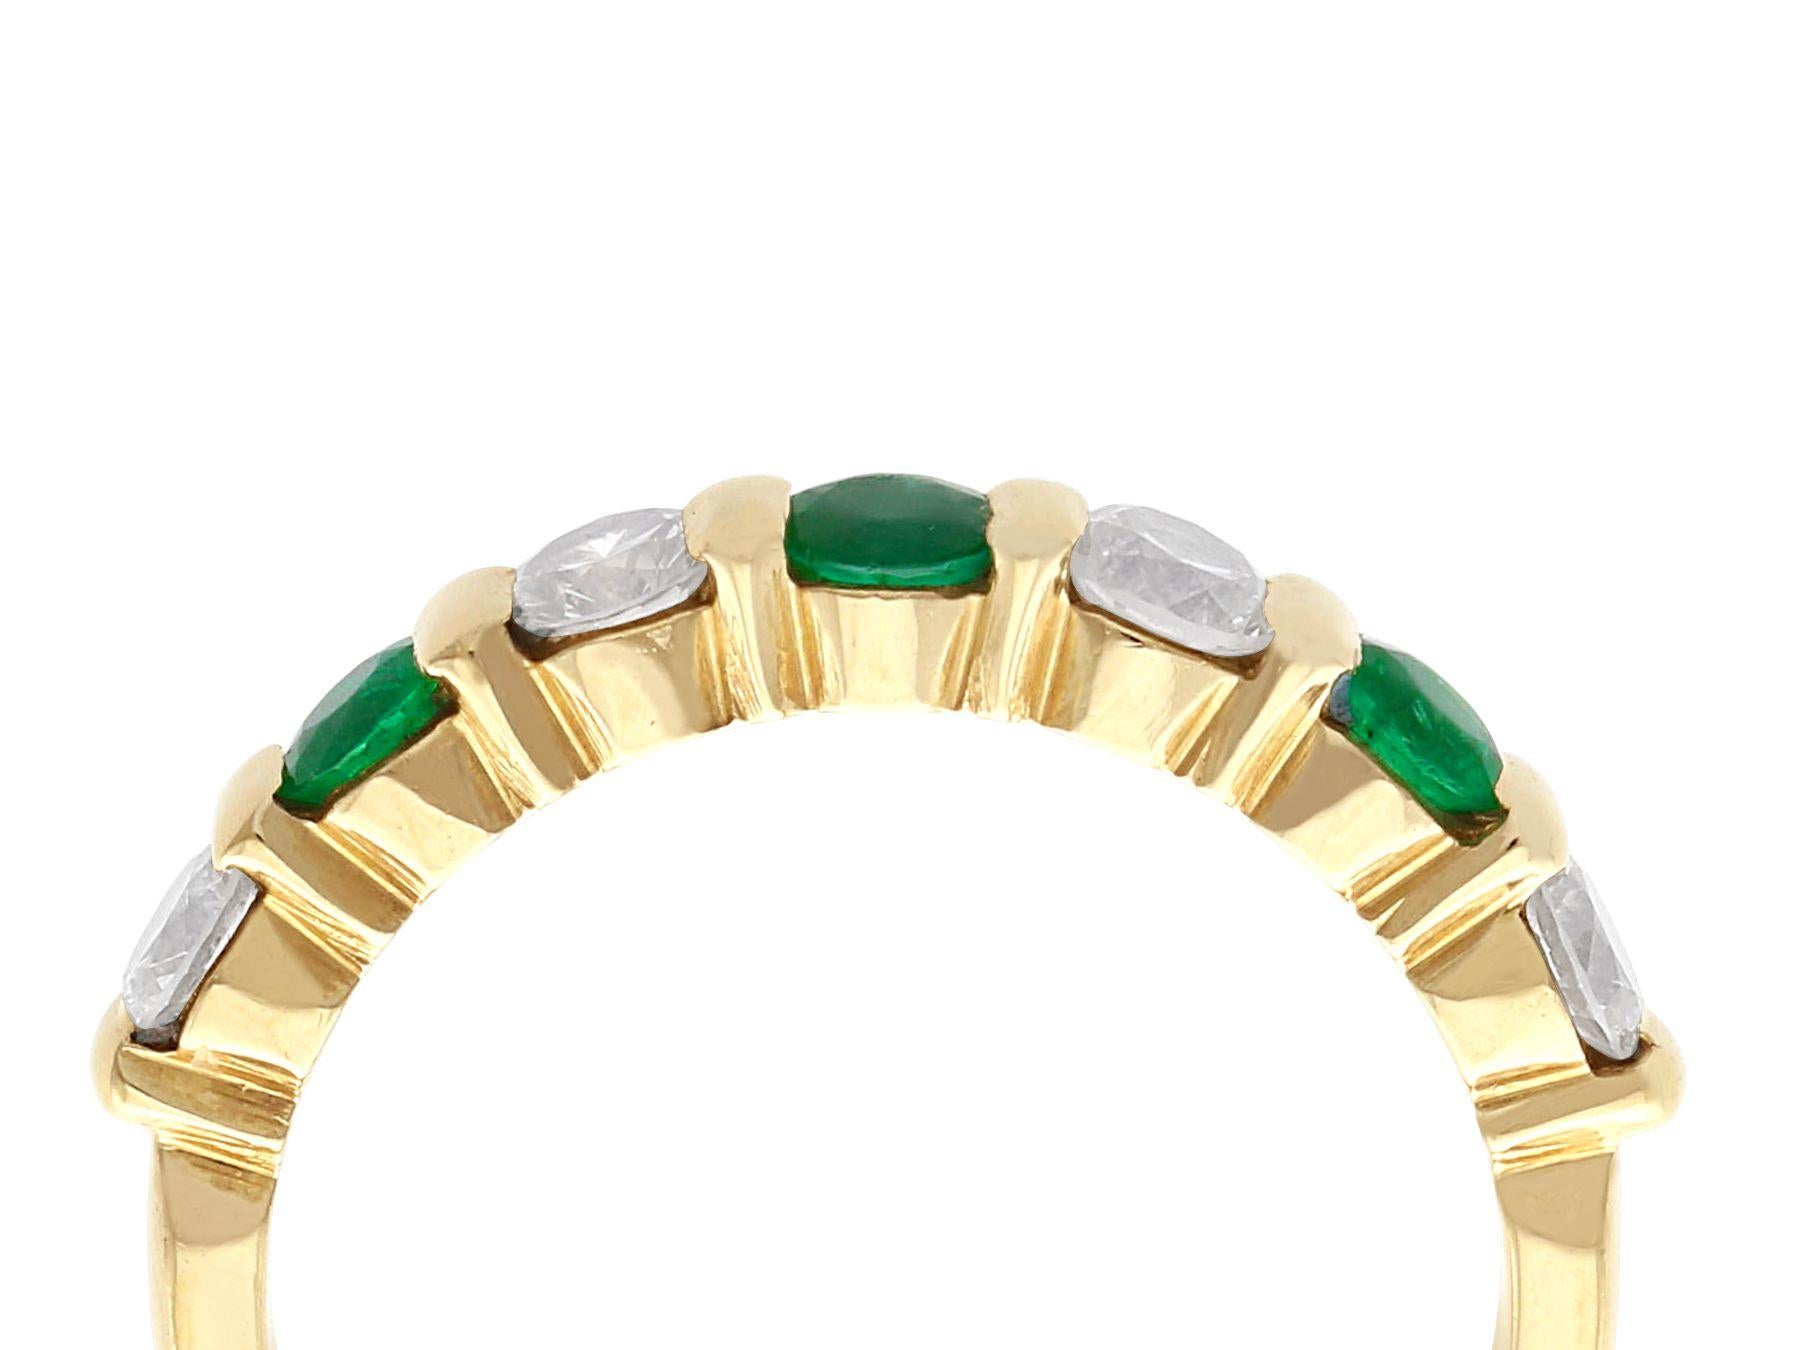 A fine and impressive vintage French 0.55 carat emerald and 0.80 carat diamond, 18 karat yellow gold half eternity ring; part of our vintage jewelry and estate jewelry collections.

This fine and impressive vintage emerald and diamond ring has been